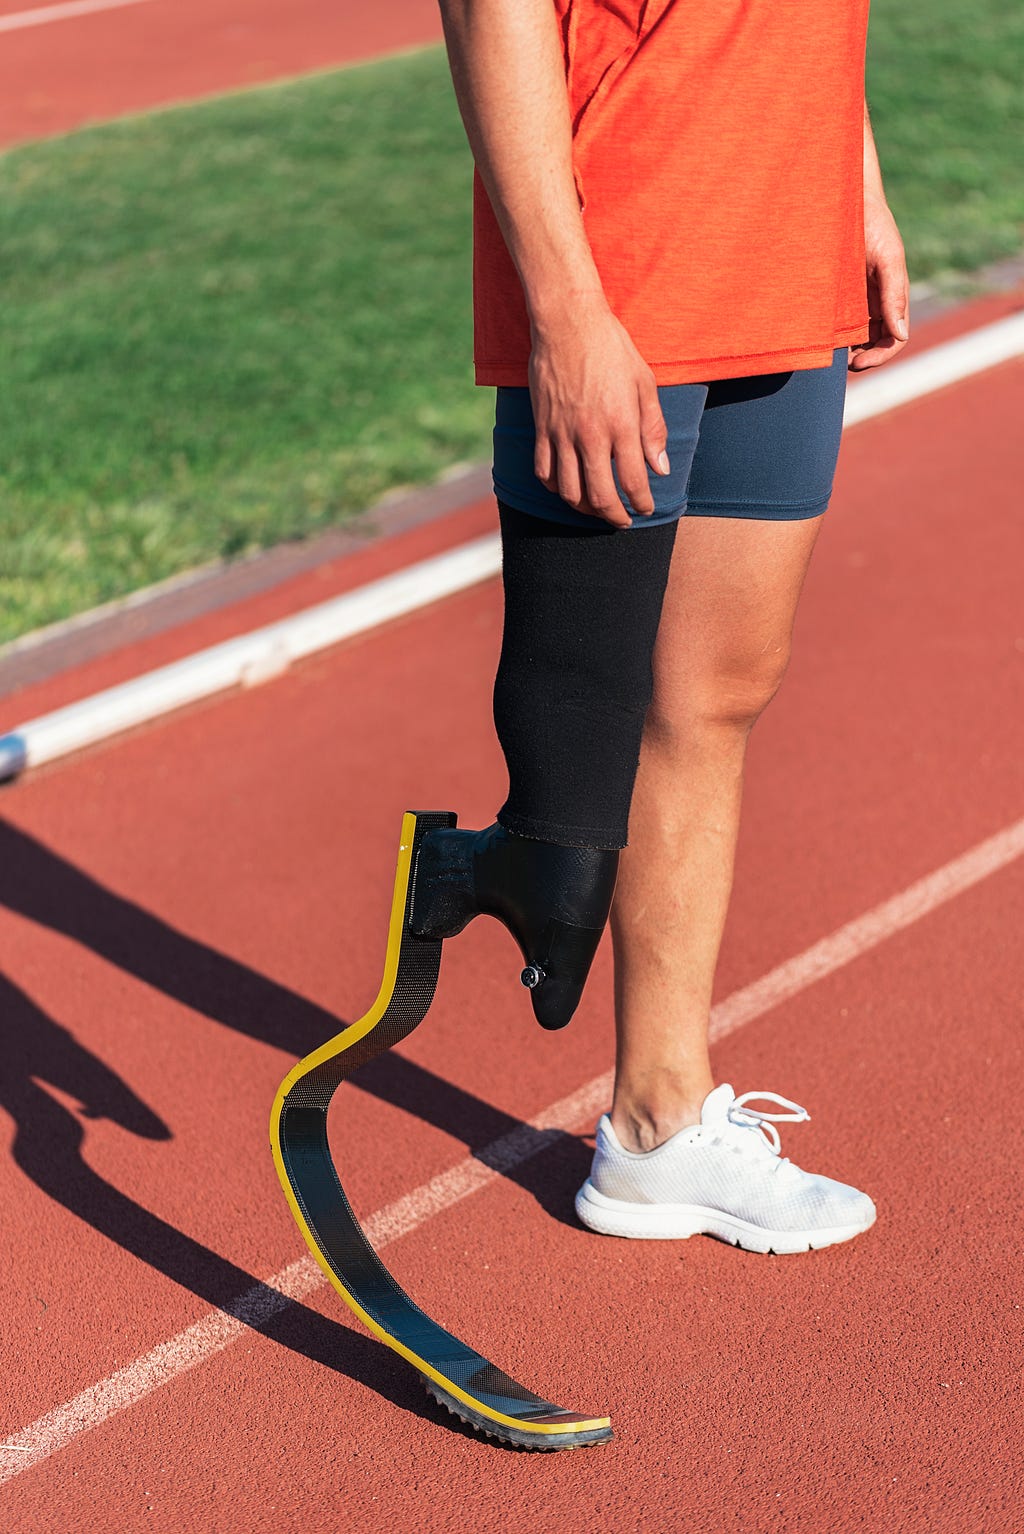 Close up of athlete with leg prosthesis.